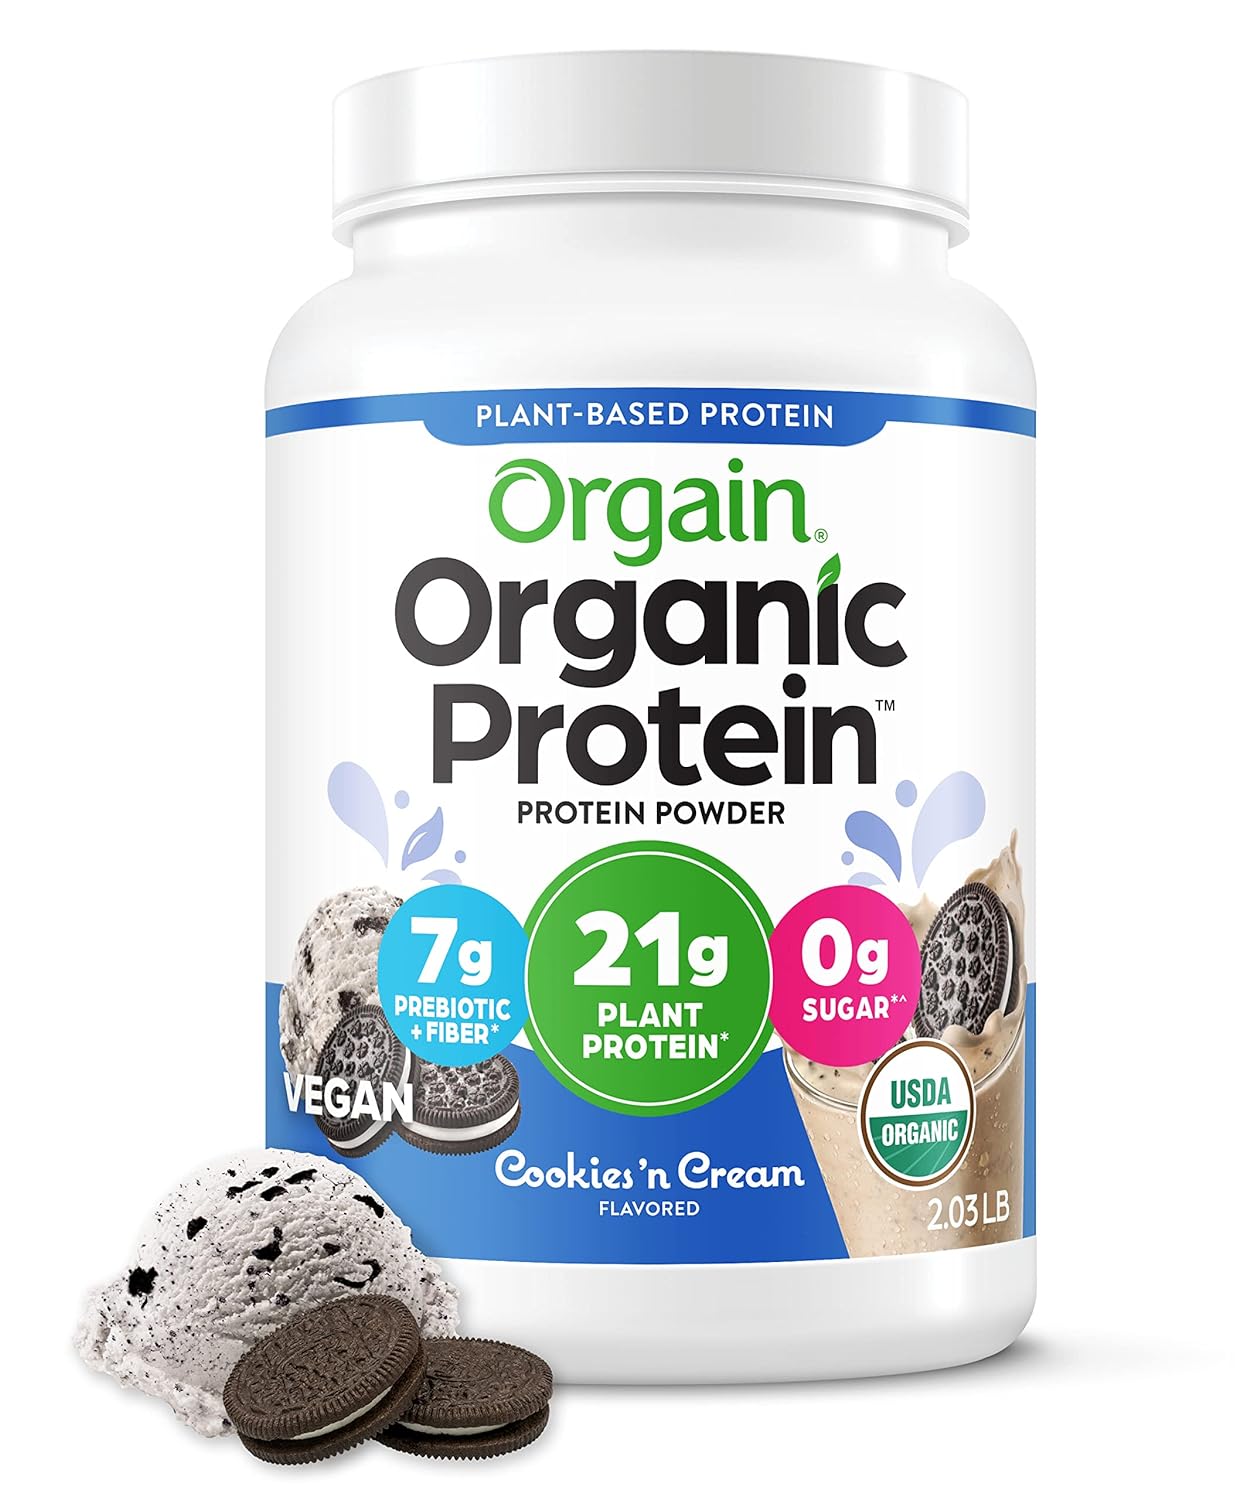 Orgain Organic Vegan Protein Powder, Cookies and Cream - 21g Plant Based Protein, Gluten Free, Dairy Free, Lactose Free, Soy Free, No Sugar Added, Kosher, For Smoothies & Shakes - 2.03lb